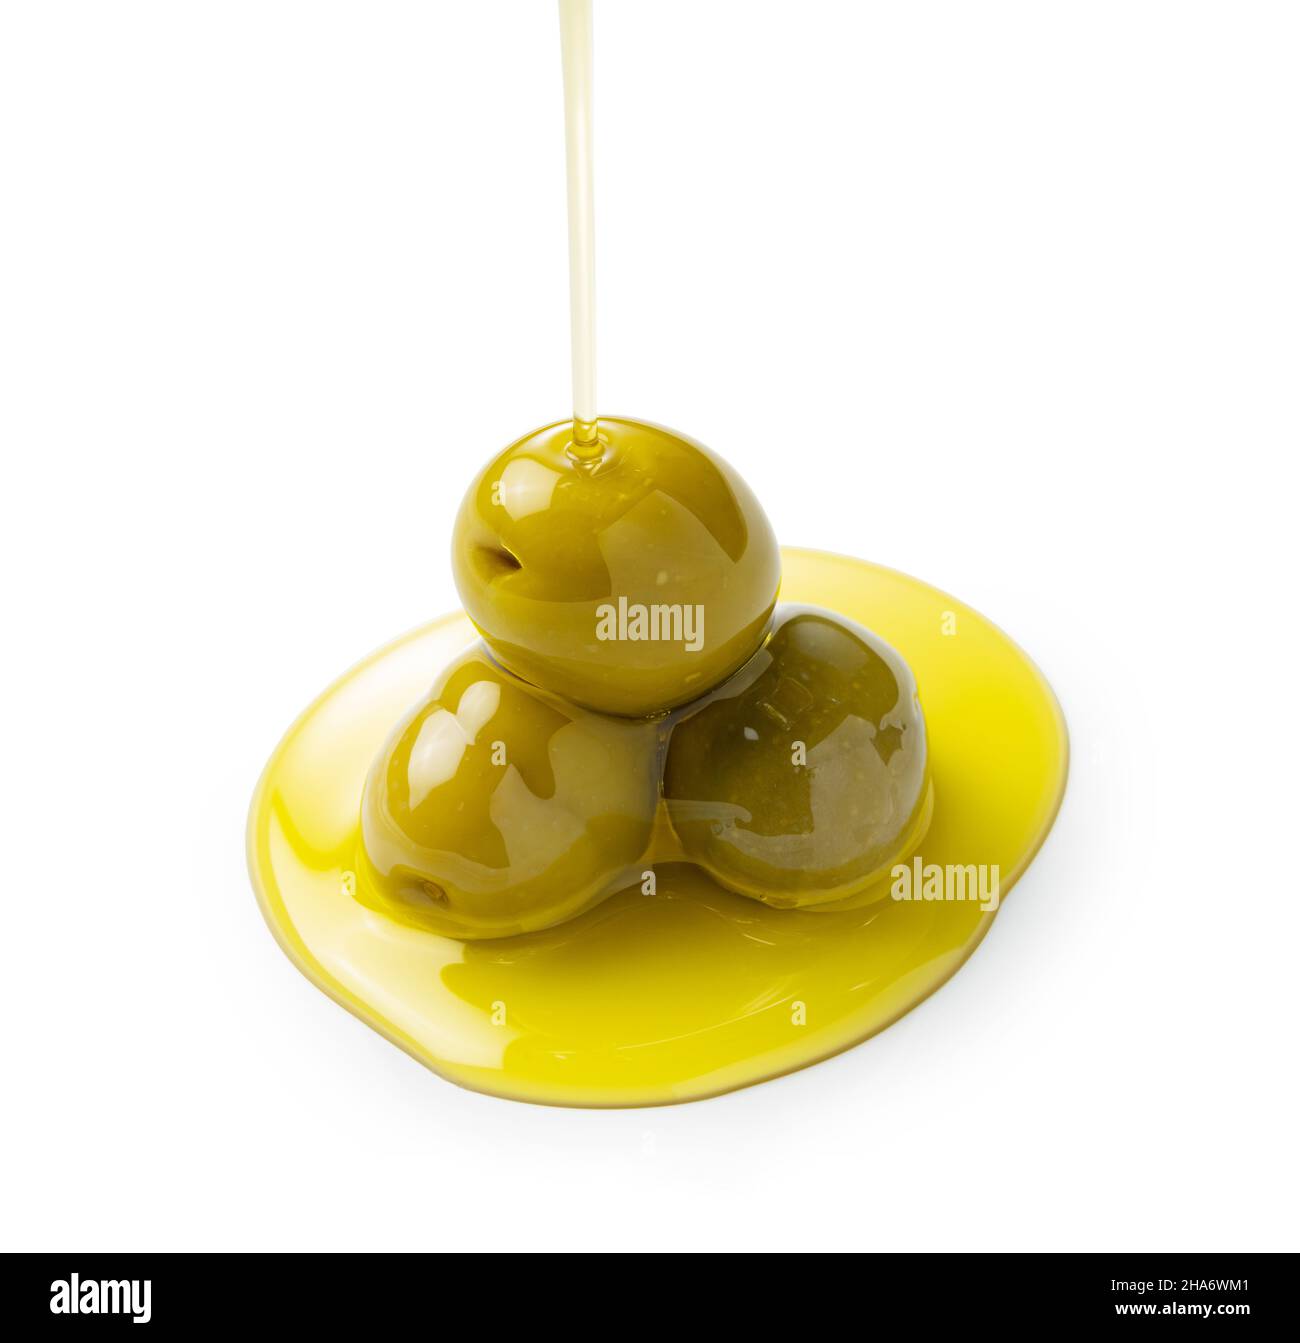 The moment when olive oil is poured over olives placed on a white background Stock Photo